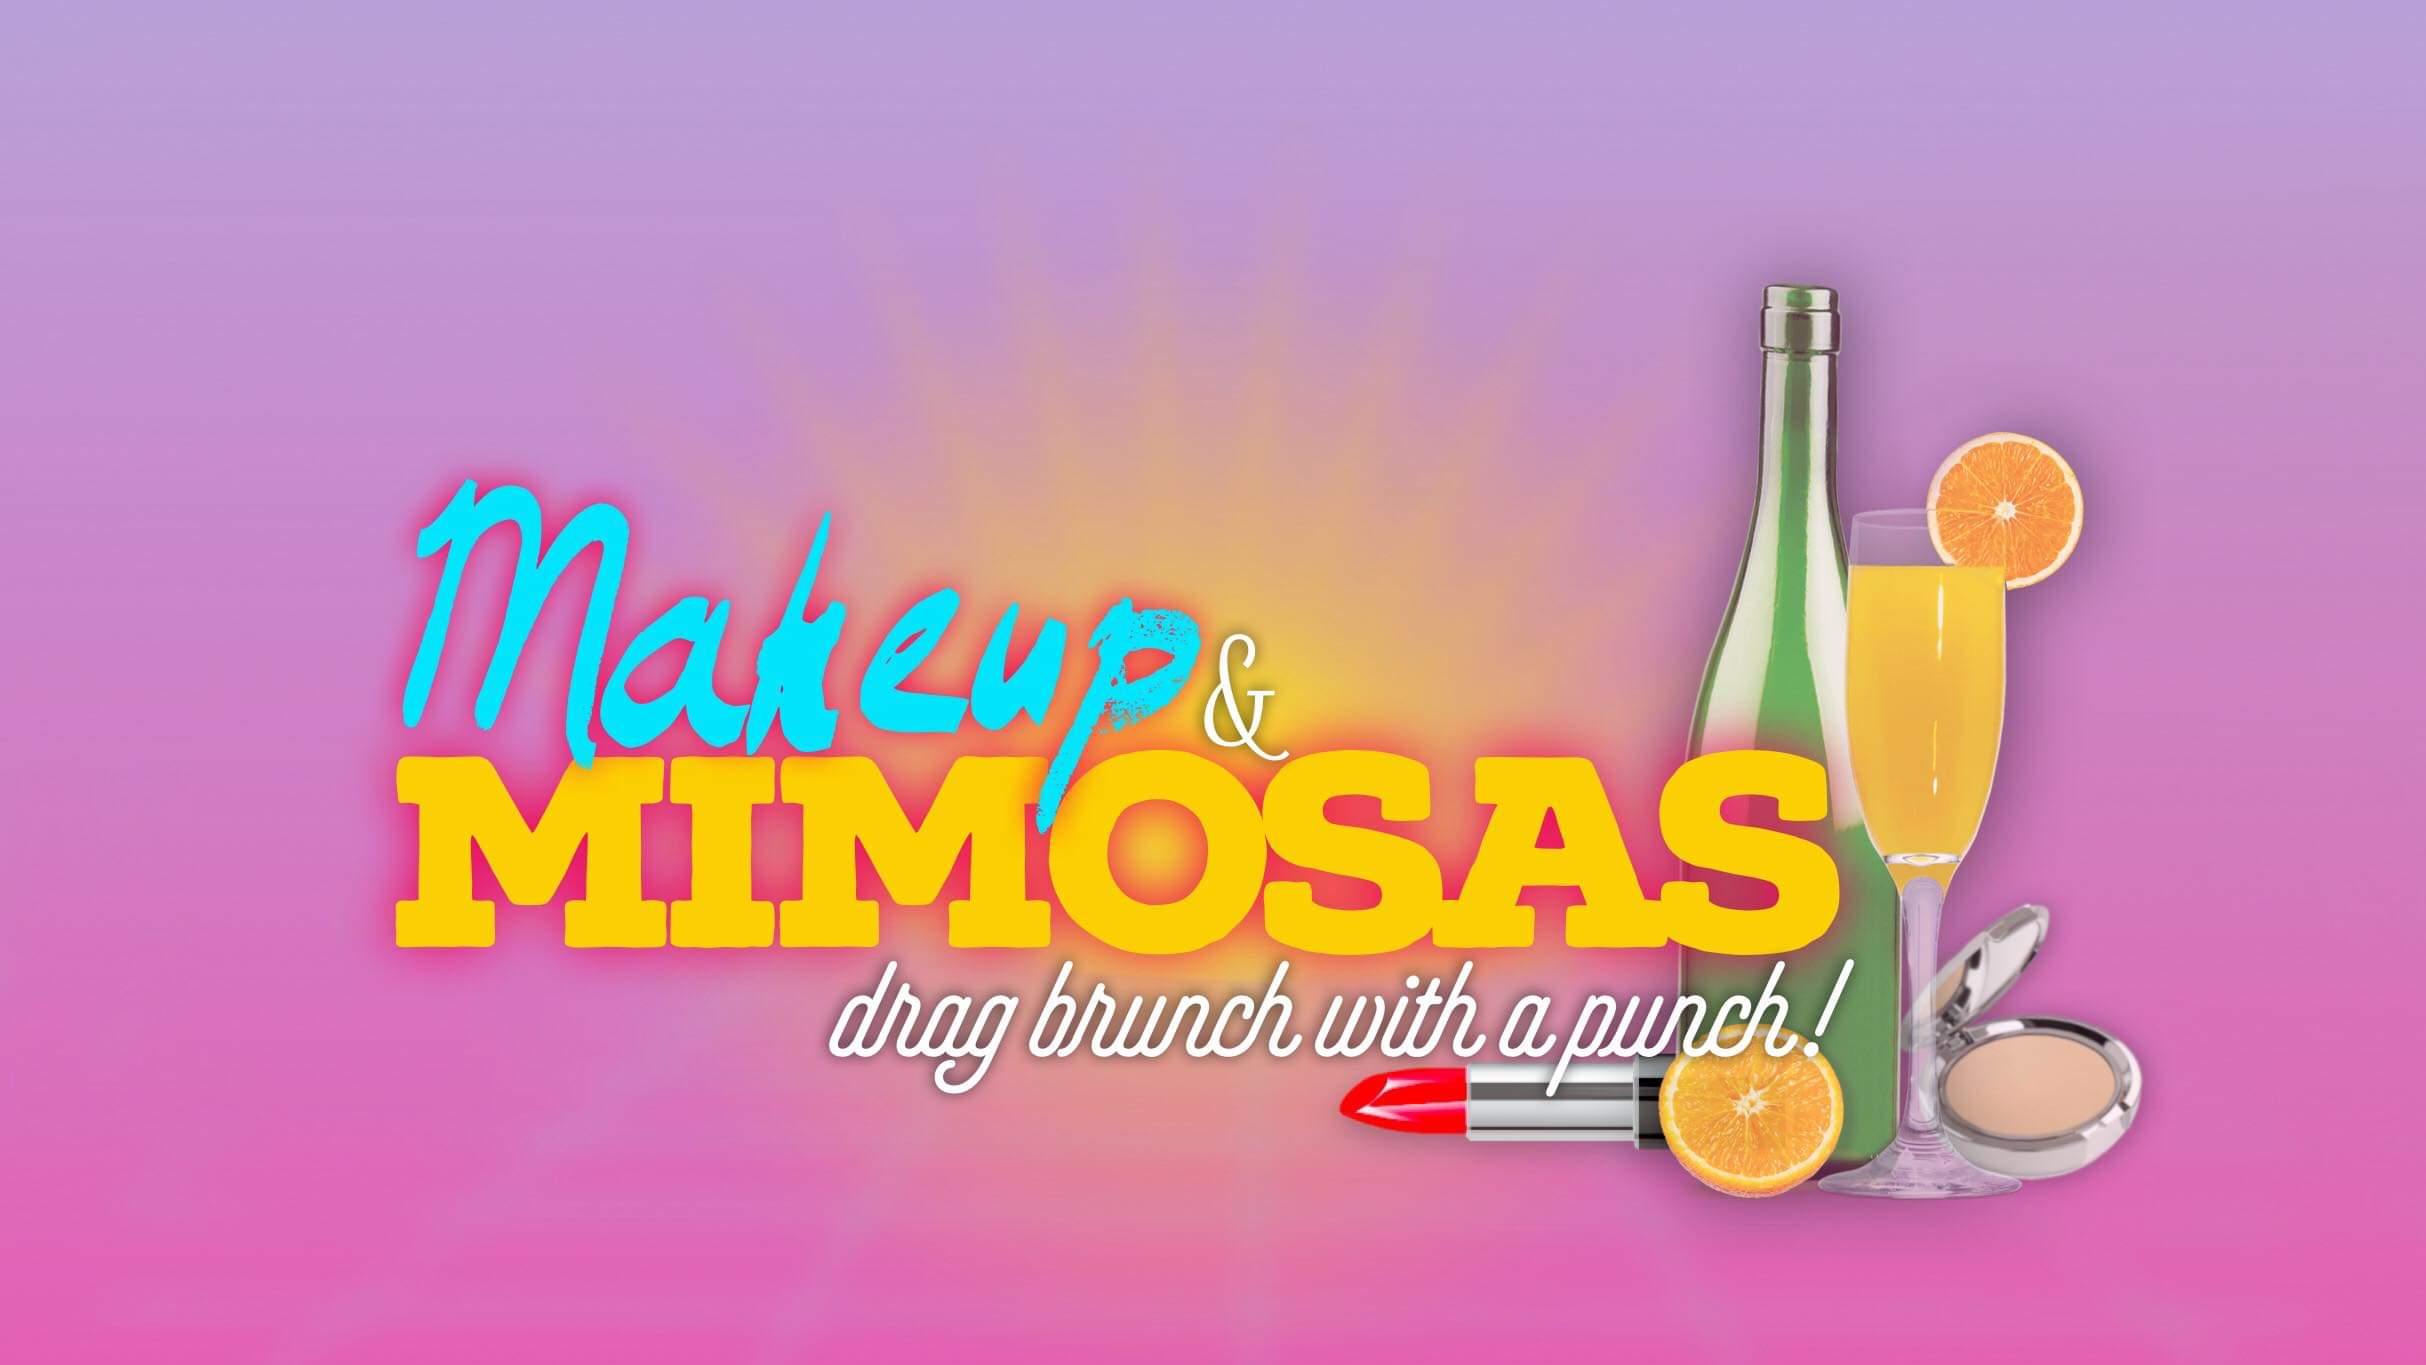 Makeup & Mimosas: Drag Brunch with a Punch - 13+ with Parent/Guardian